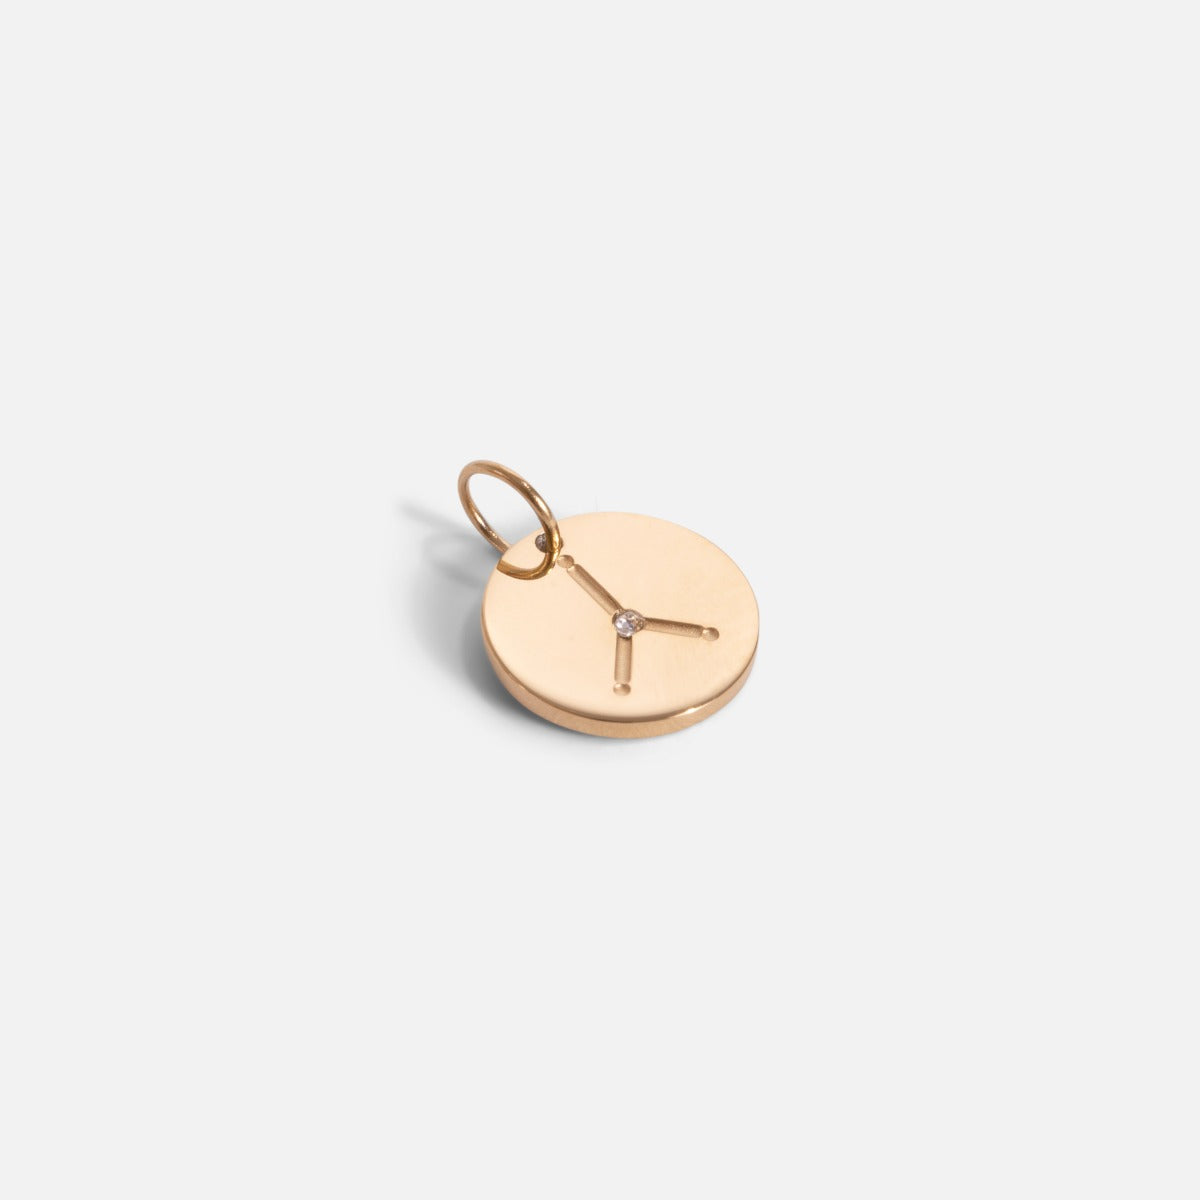 Small golden charm engraved with the zodiac constellation "cancer"